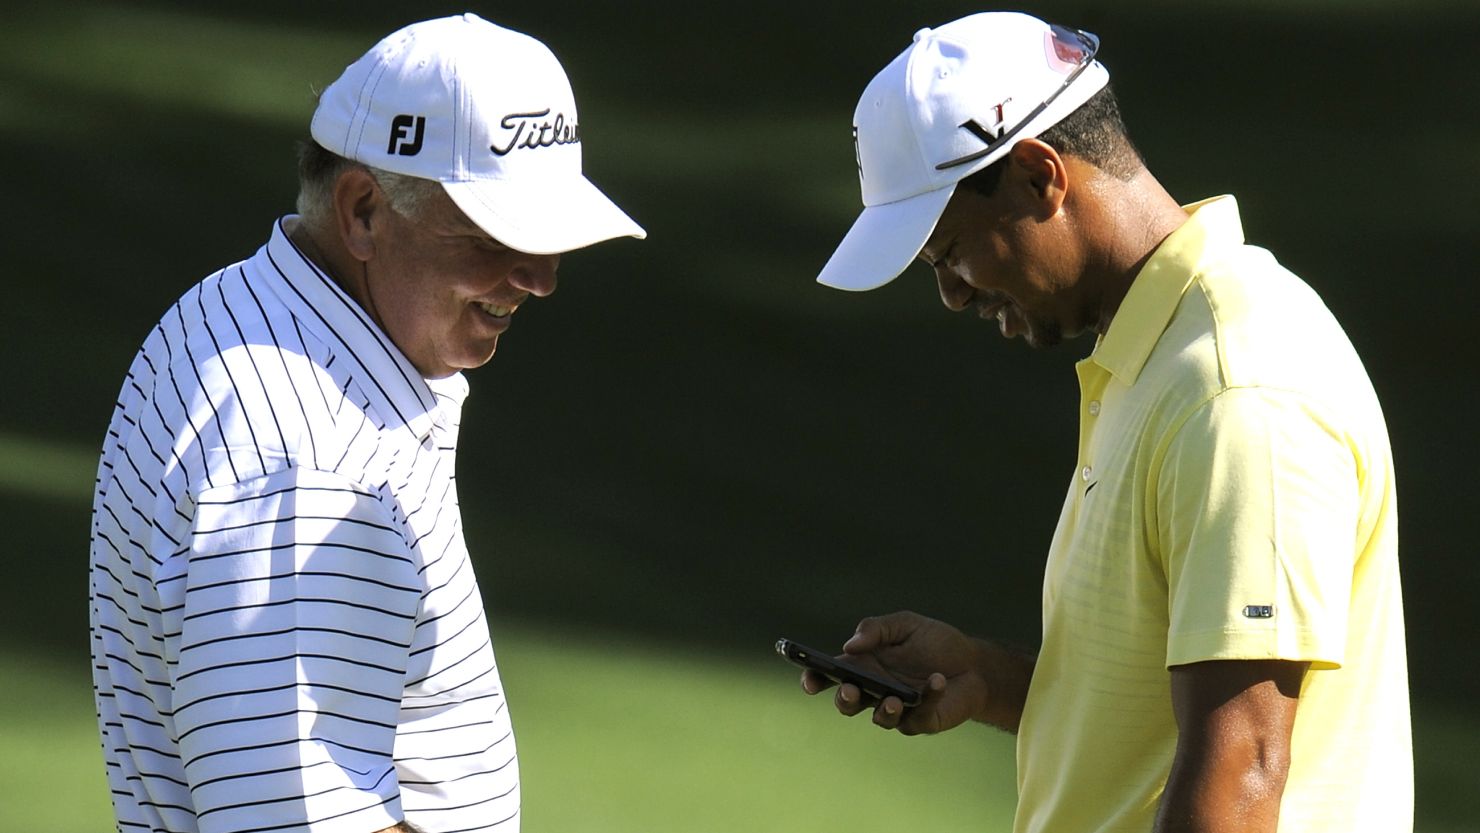 Golfers Mark O'Meara and Tiger Woods aren't the only ones who'll be able to check their phones on the course.